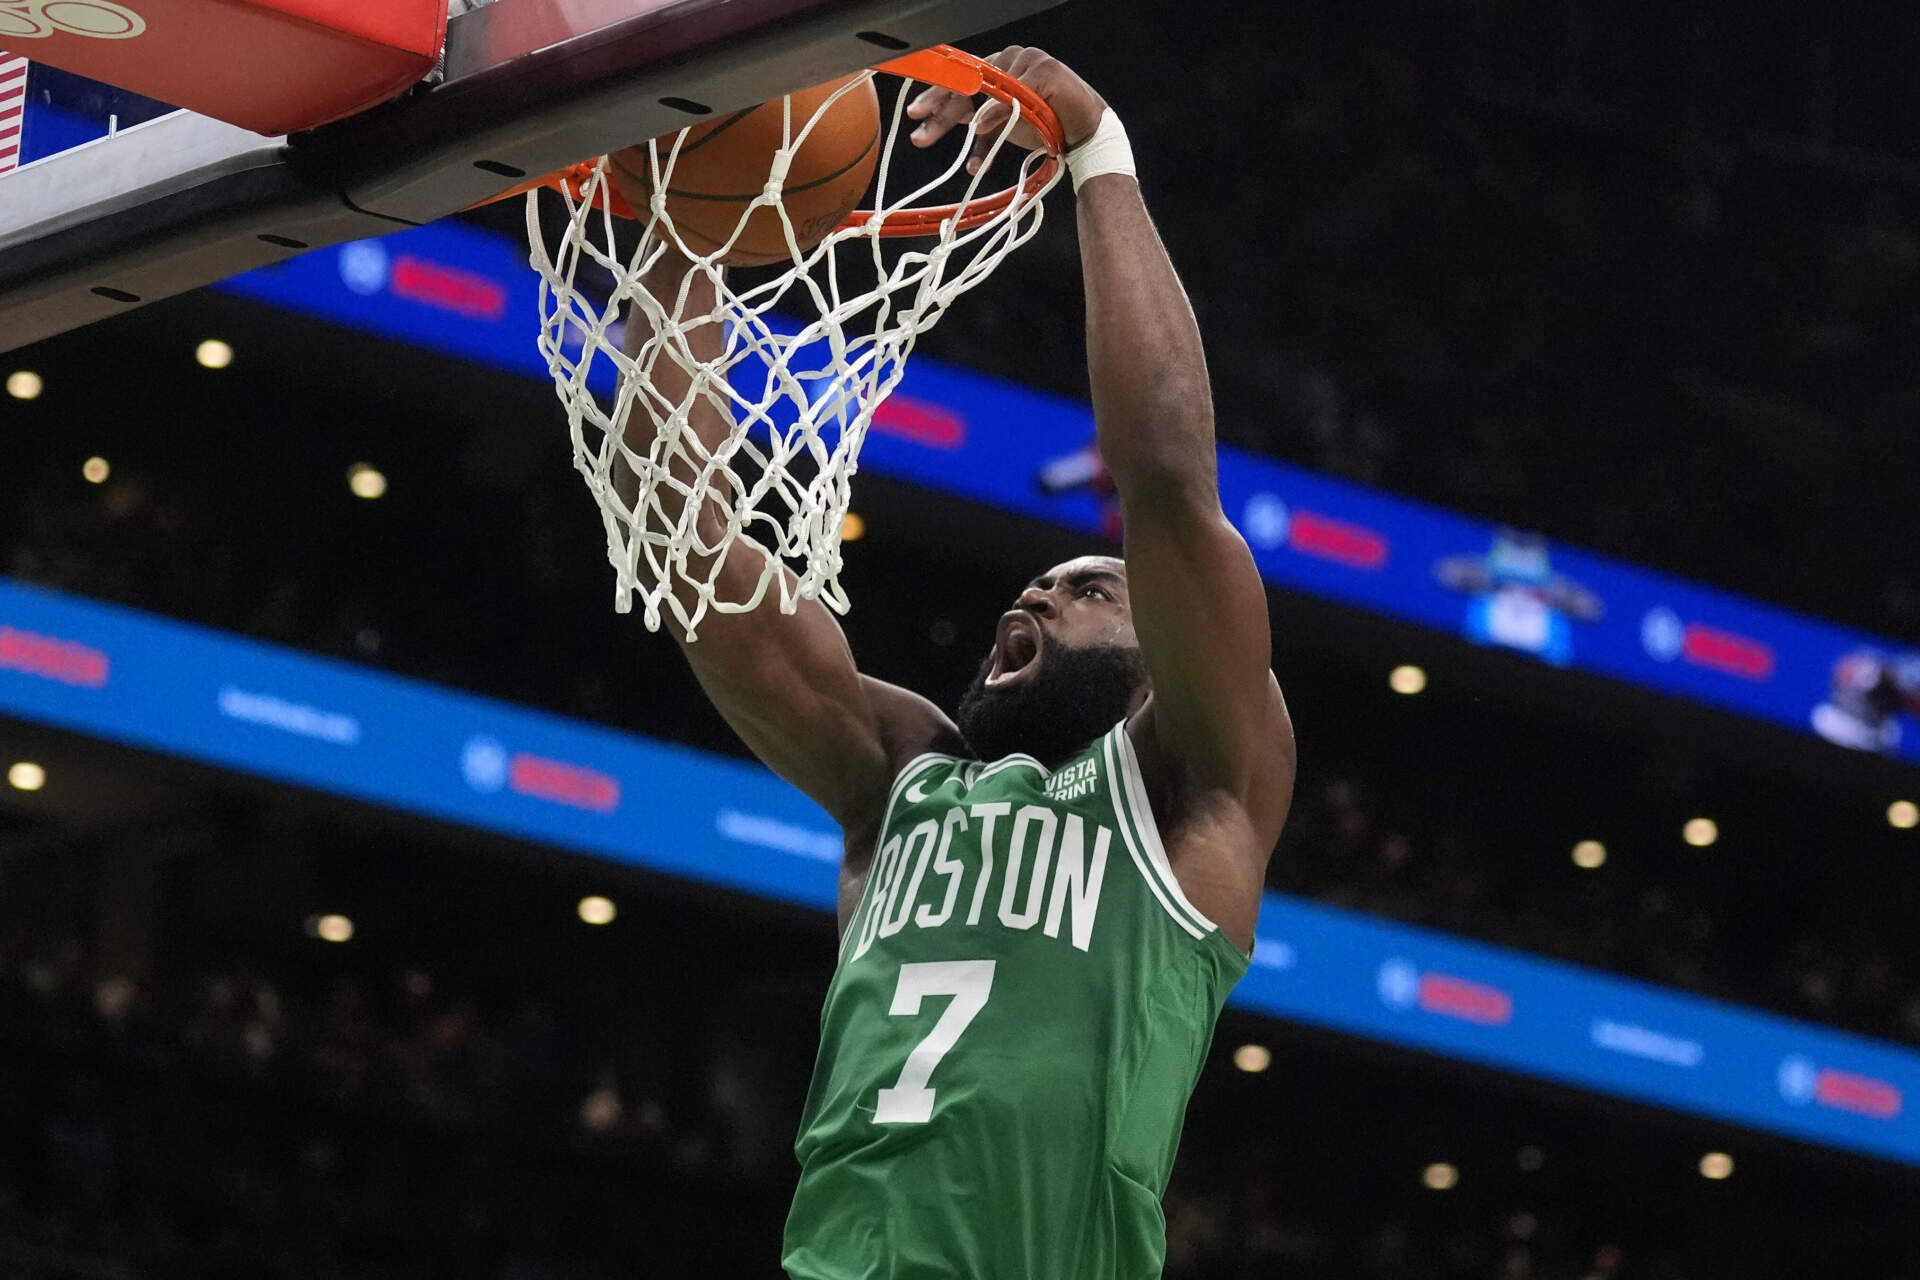 Boston Celtics guard Jaylen Brown dunks the ball during the first half of Game 5 of the NBA basketball finals against the Dallas Maverick. (Charles Krupa/AP)